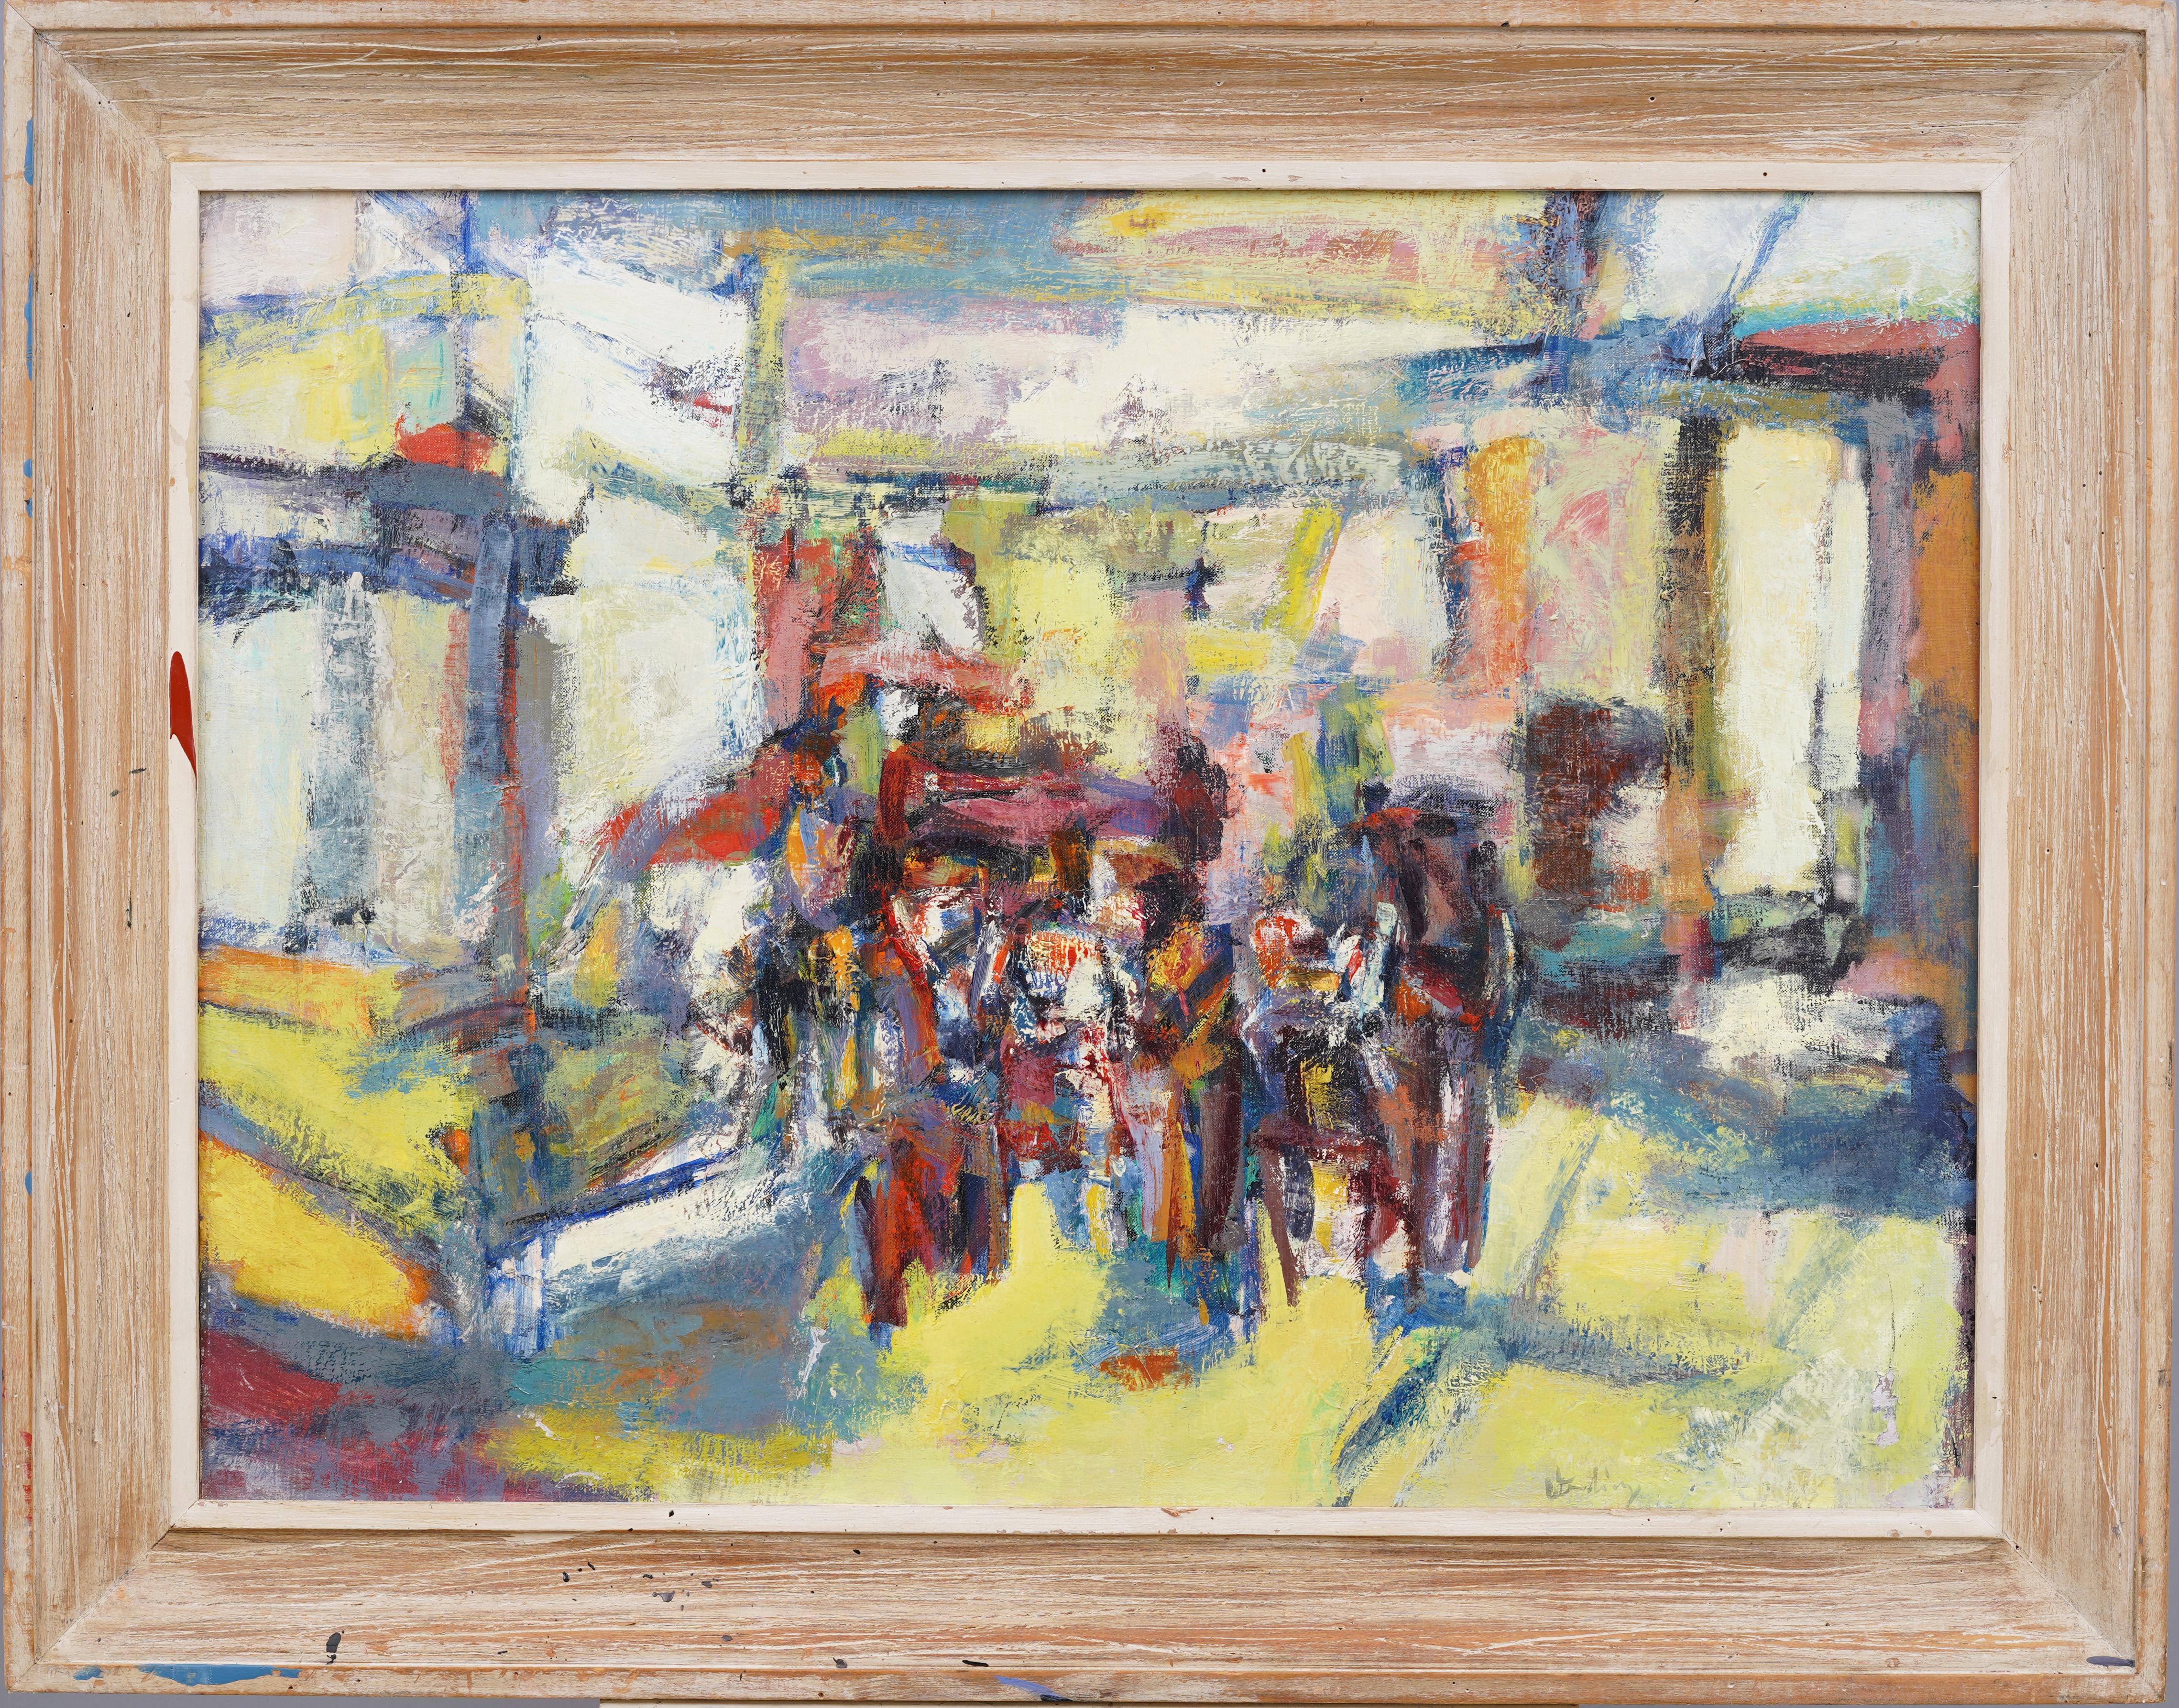 Erwin Wending  Landscape Painting - Exhibited Abstract Expressionist Framed Modernist Street Scene Signed Painting